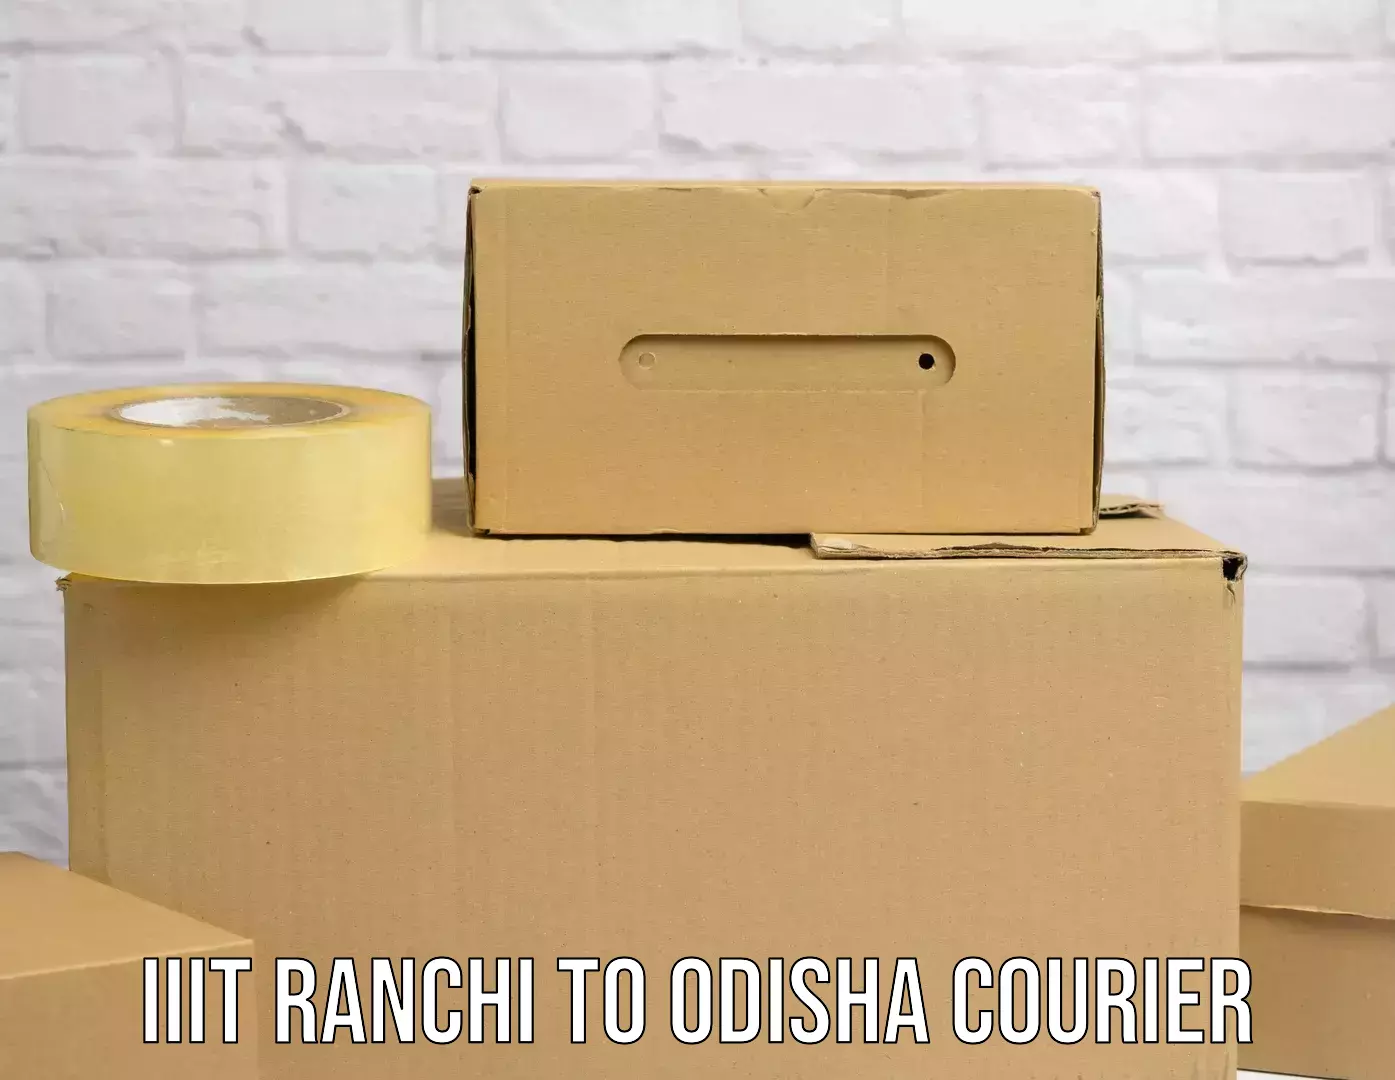 Scalable shipping solutions IIIT Ranchi to Udala